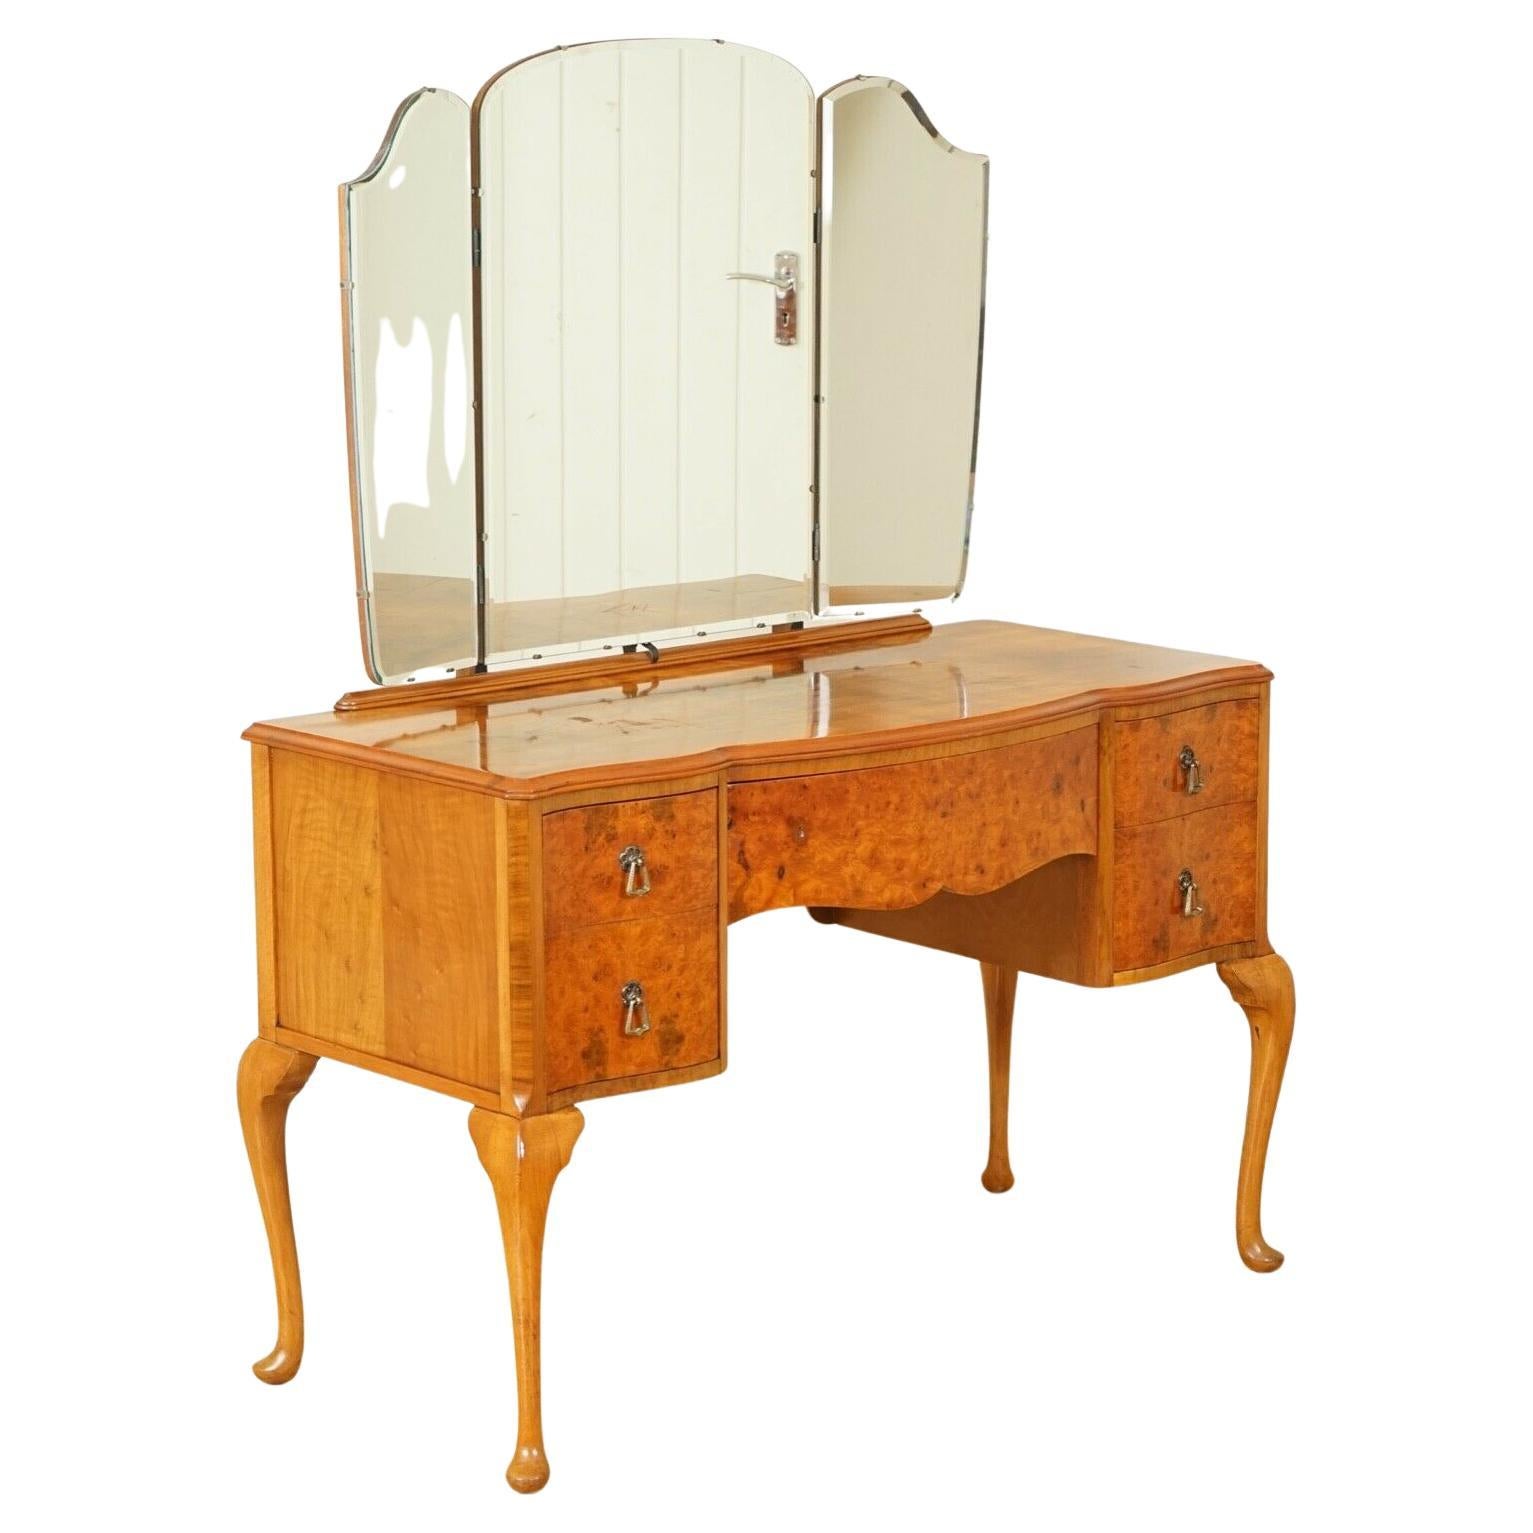 Stunning Vintage Art Deco Burr Walnut Dressing Table with Queen Anne Legs